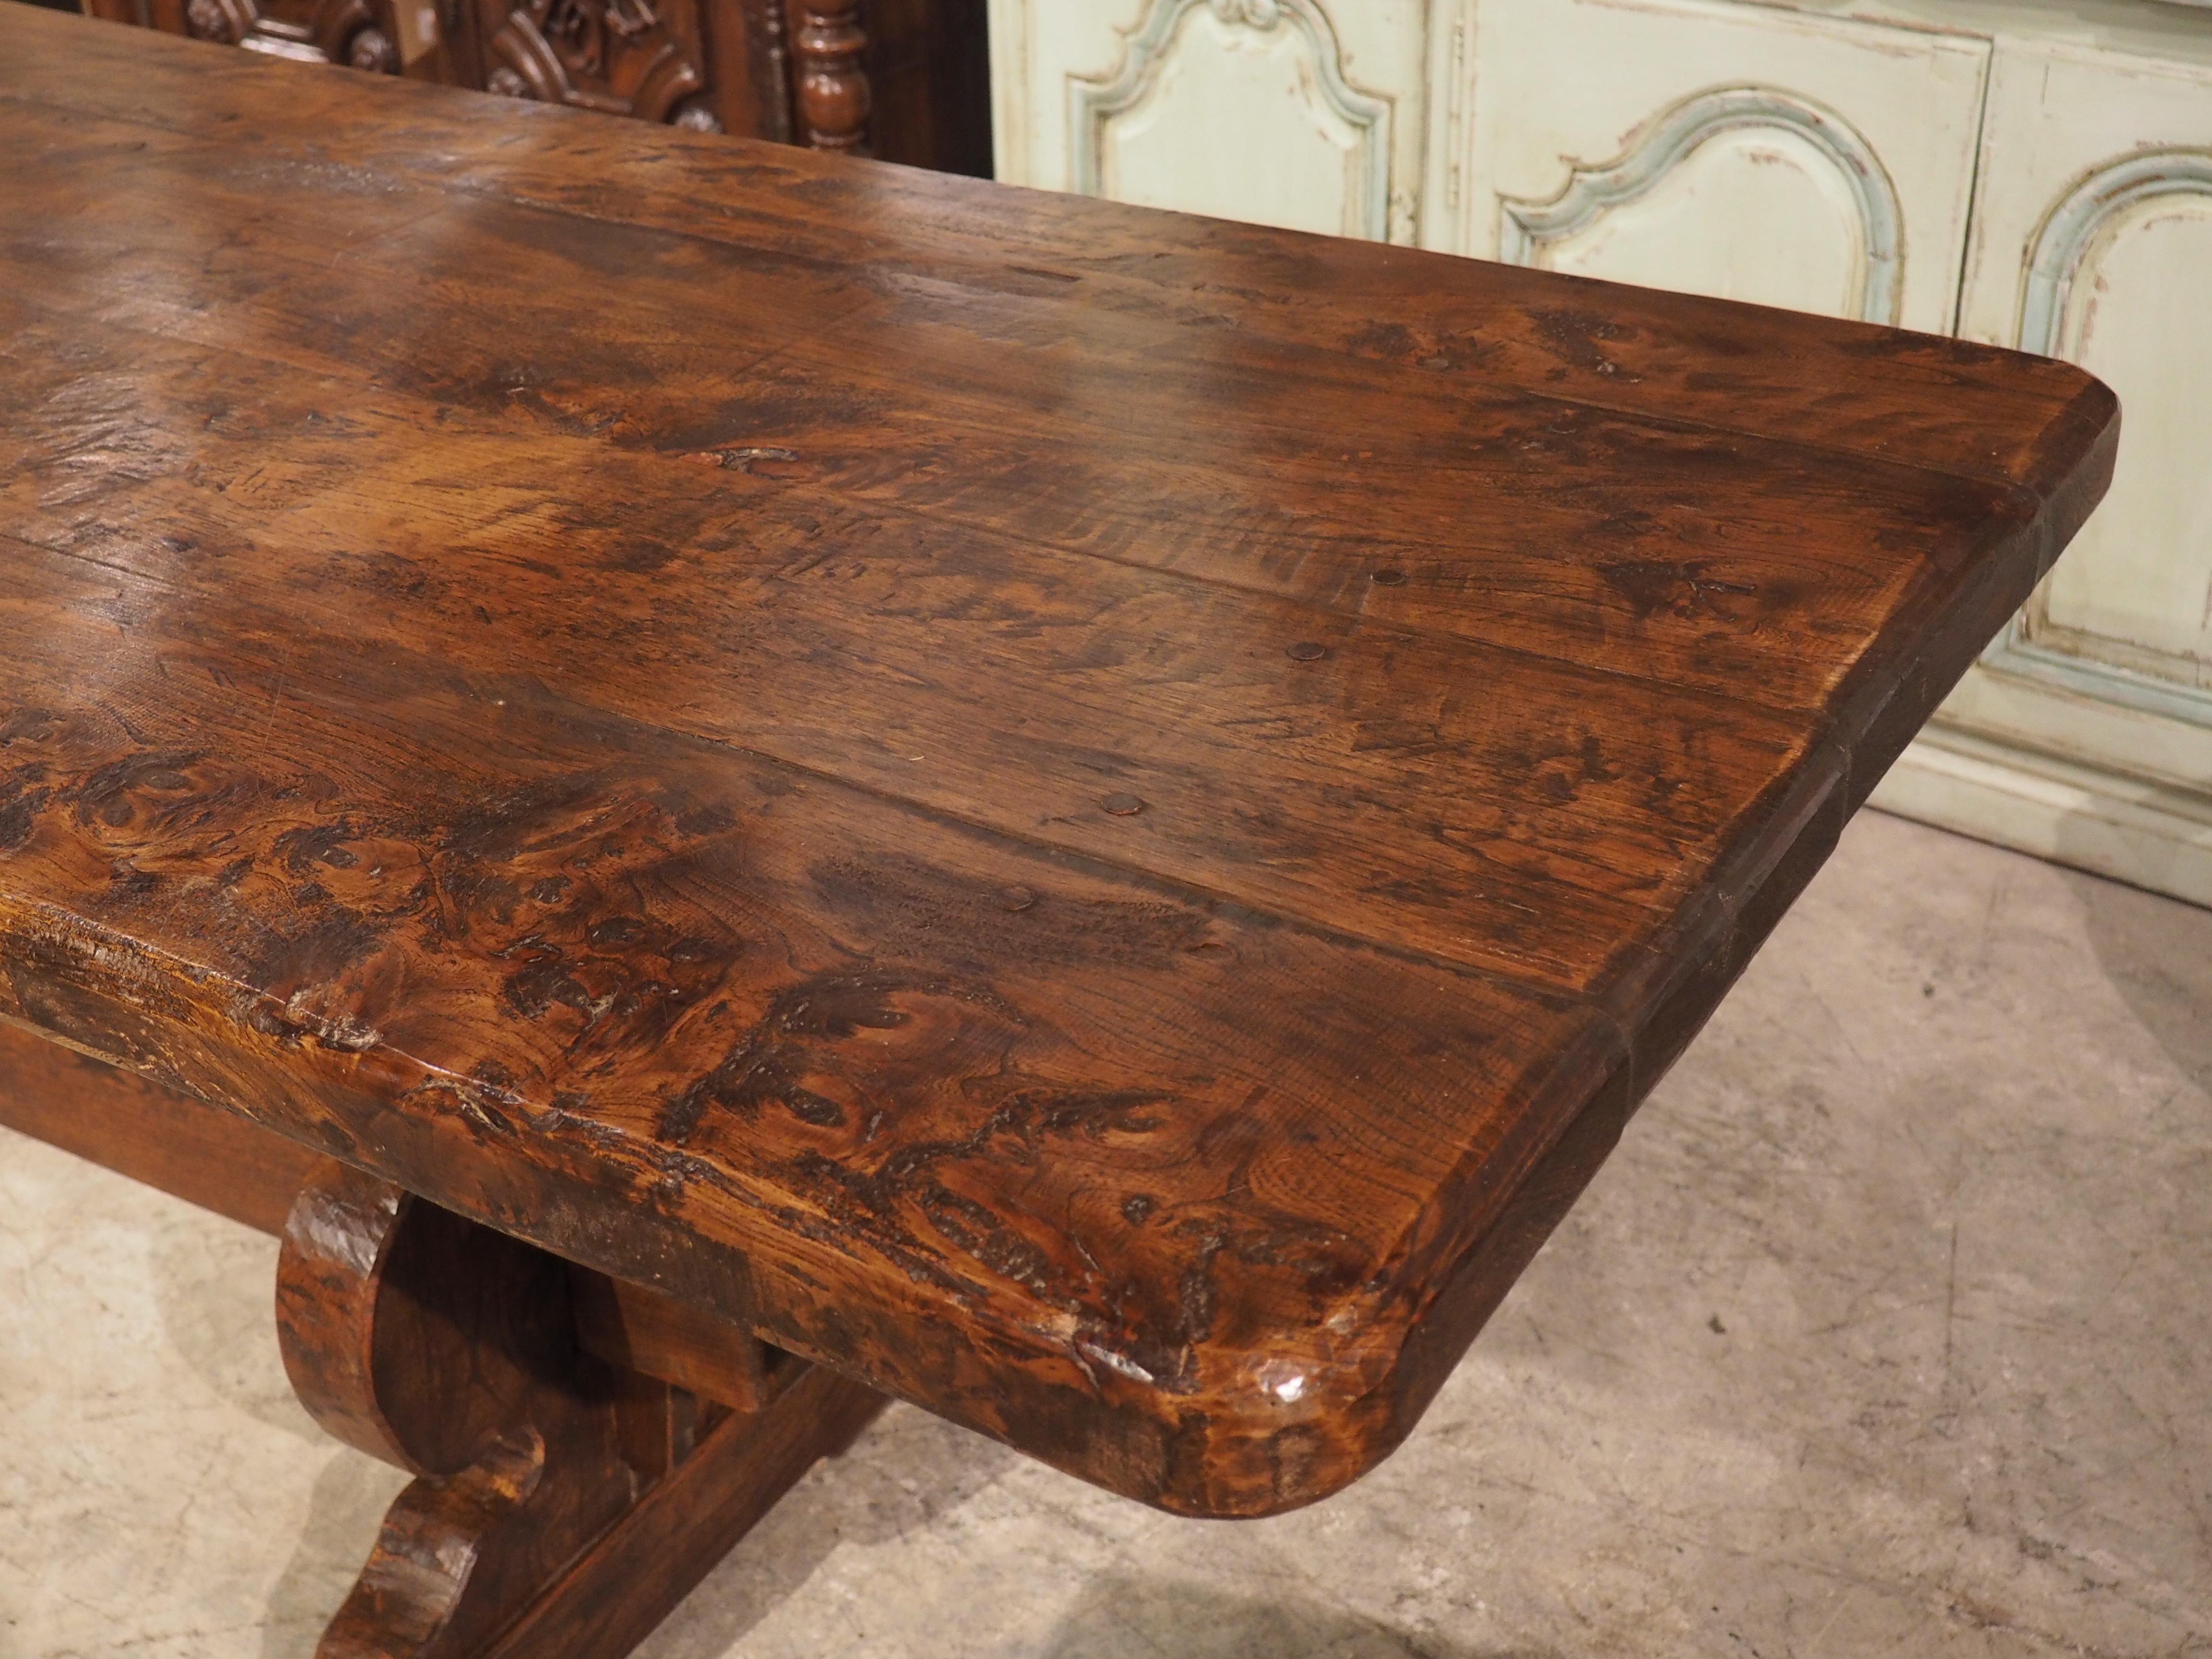 Hand-carved in chestnut in the early 1800s, this 13 foot long dining table was recently found in a chateau near Coat Nizan (see the second image for a photo as the table appeared in the chateau). Coat Nizan is a hamlet by Le Guindy River in